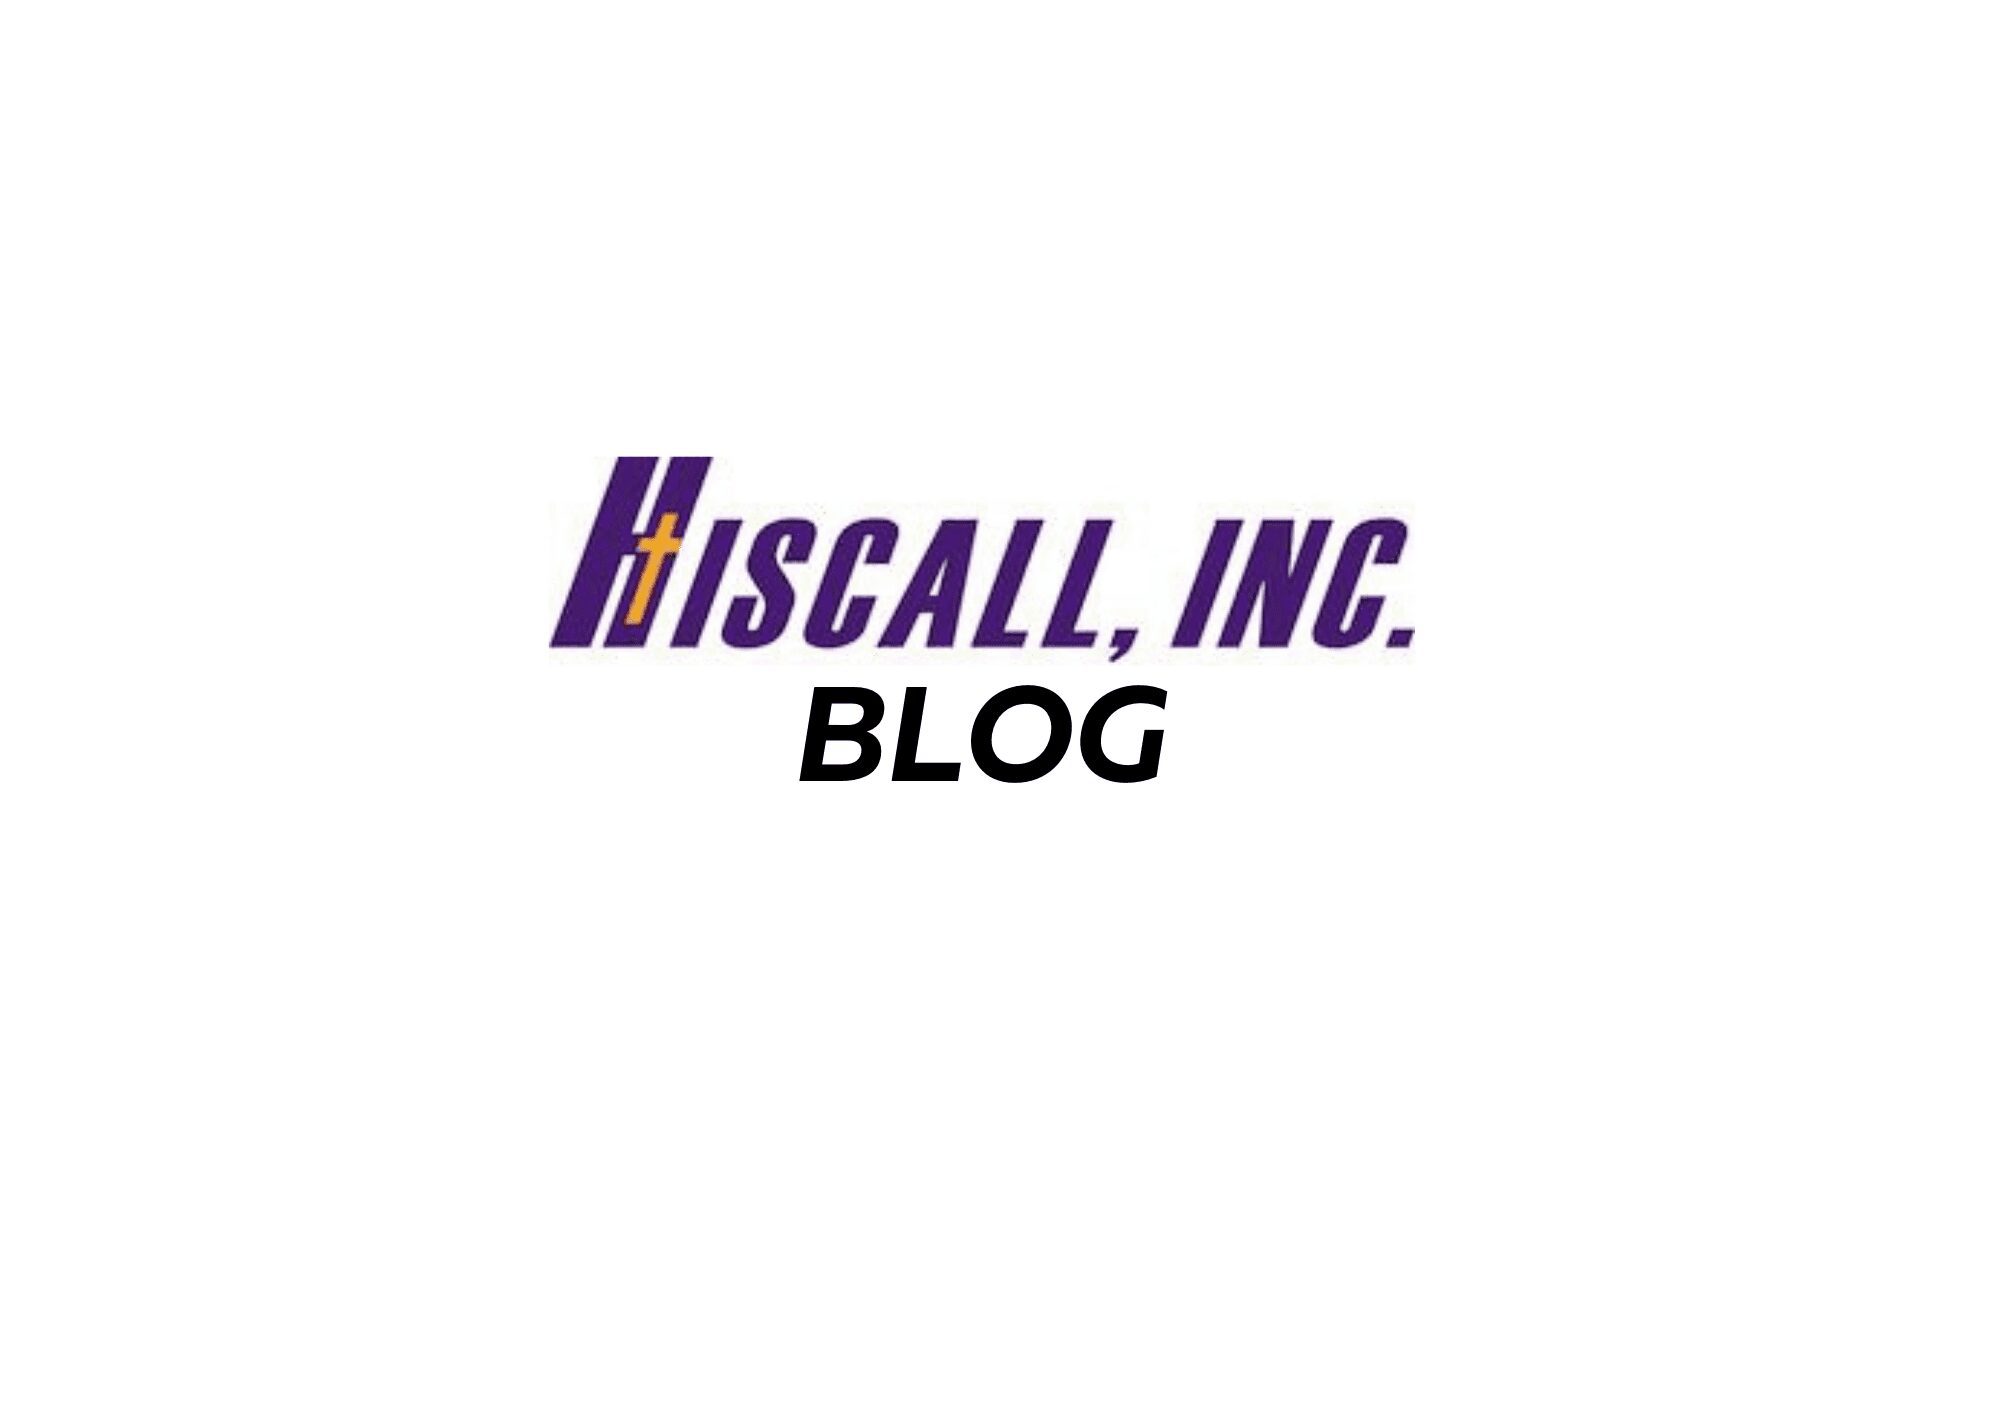 Hiscall, Inc. Participates In The Nashville Area Career Fair At The Williamson County Ag Expo Center